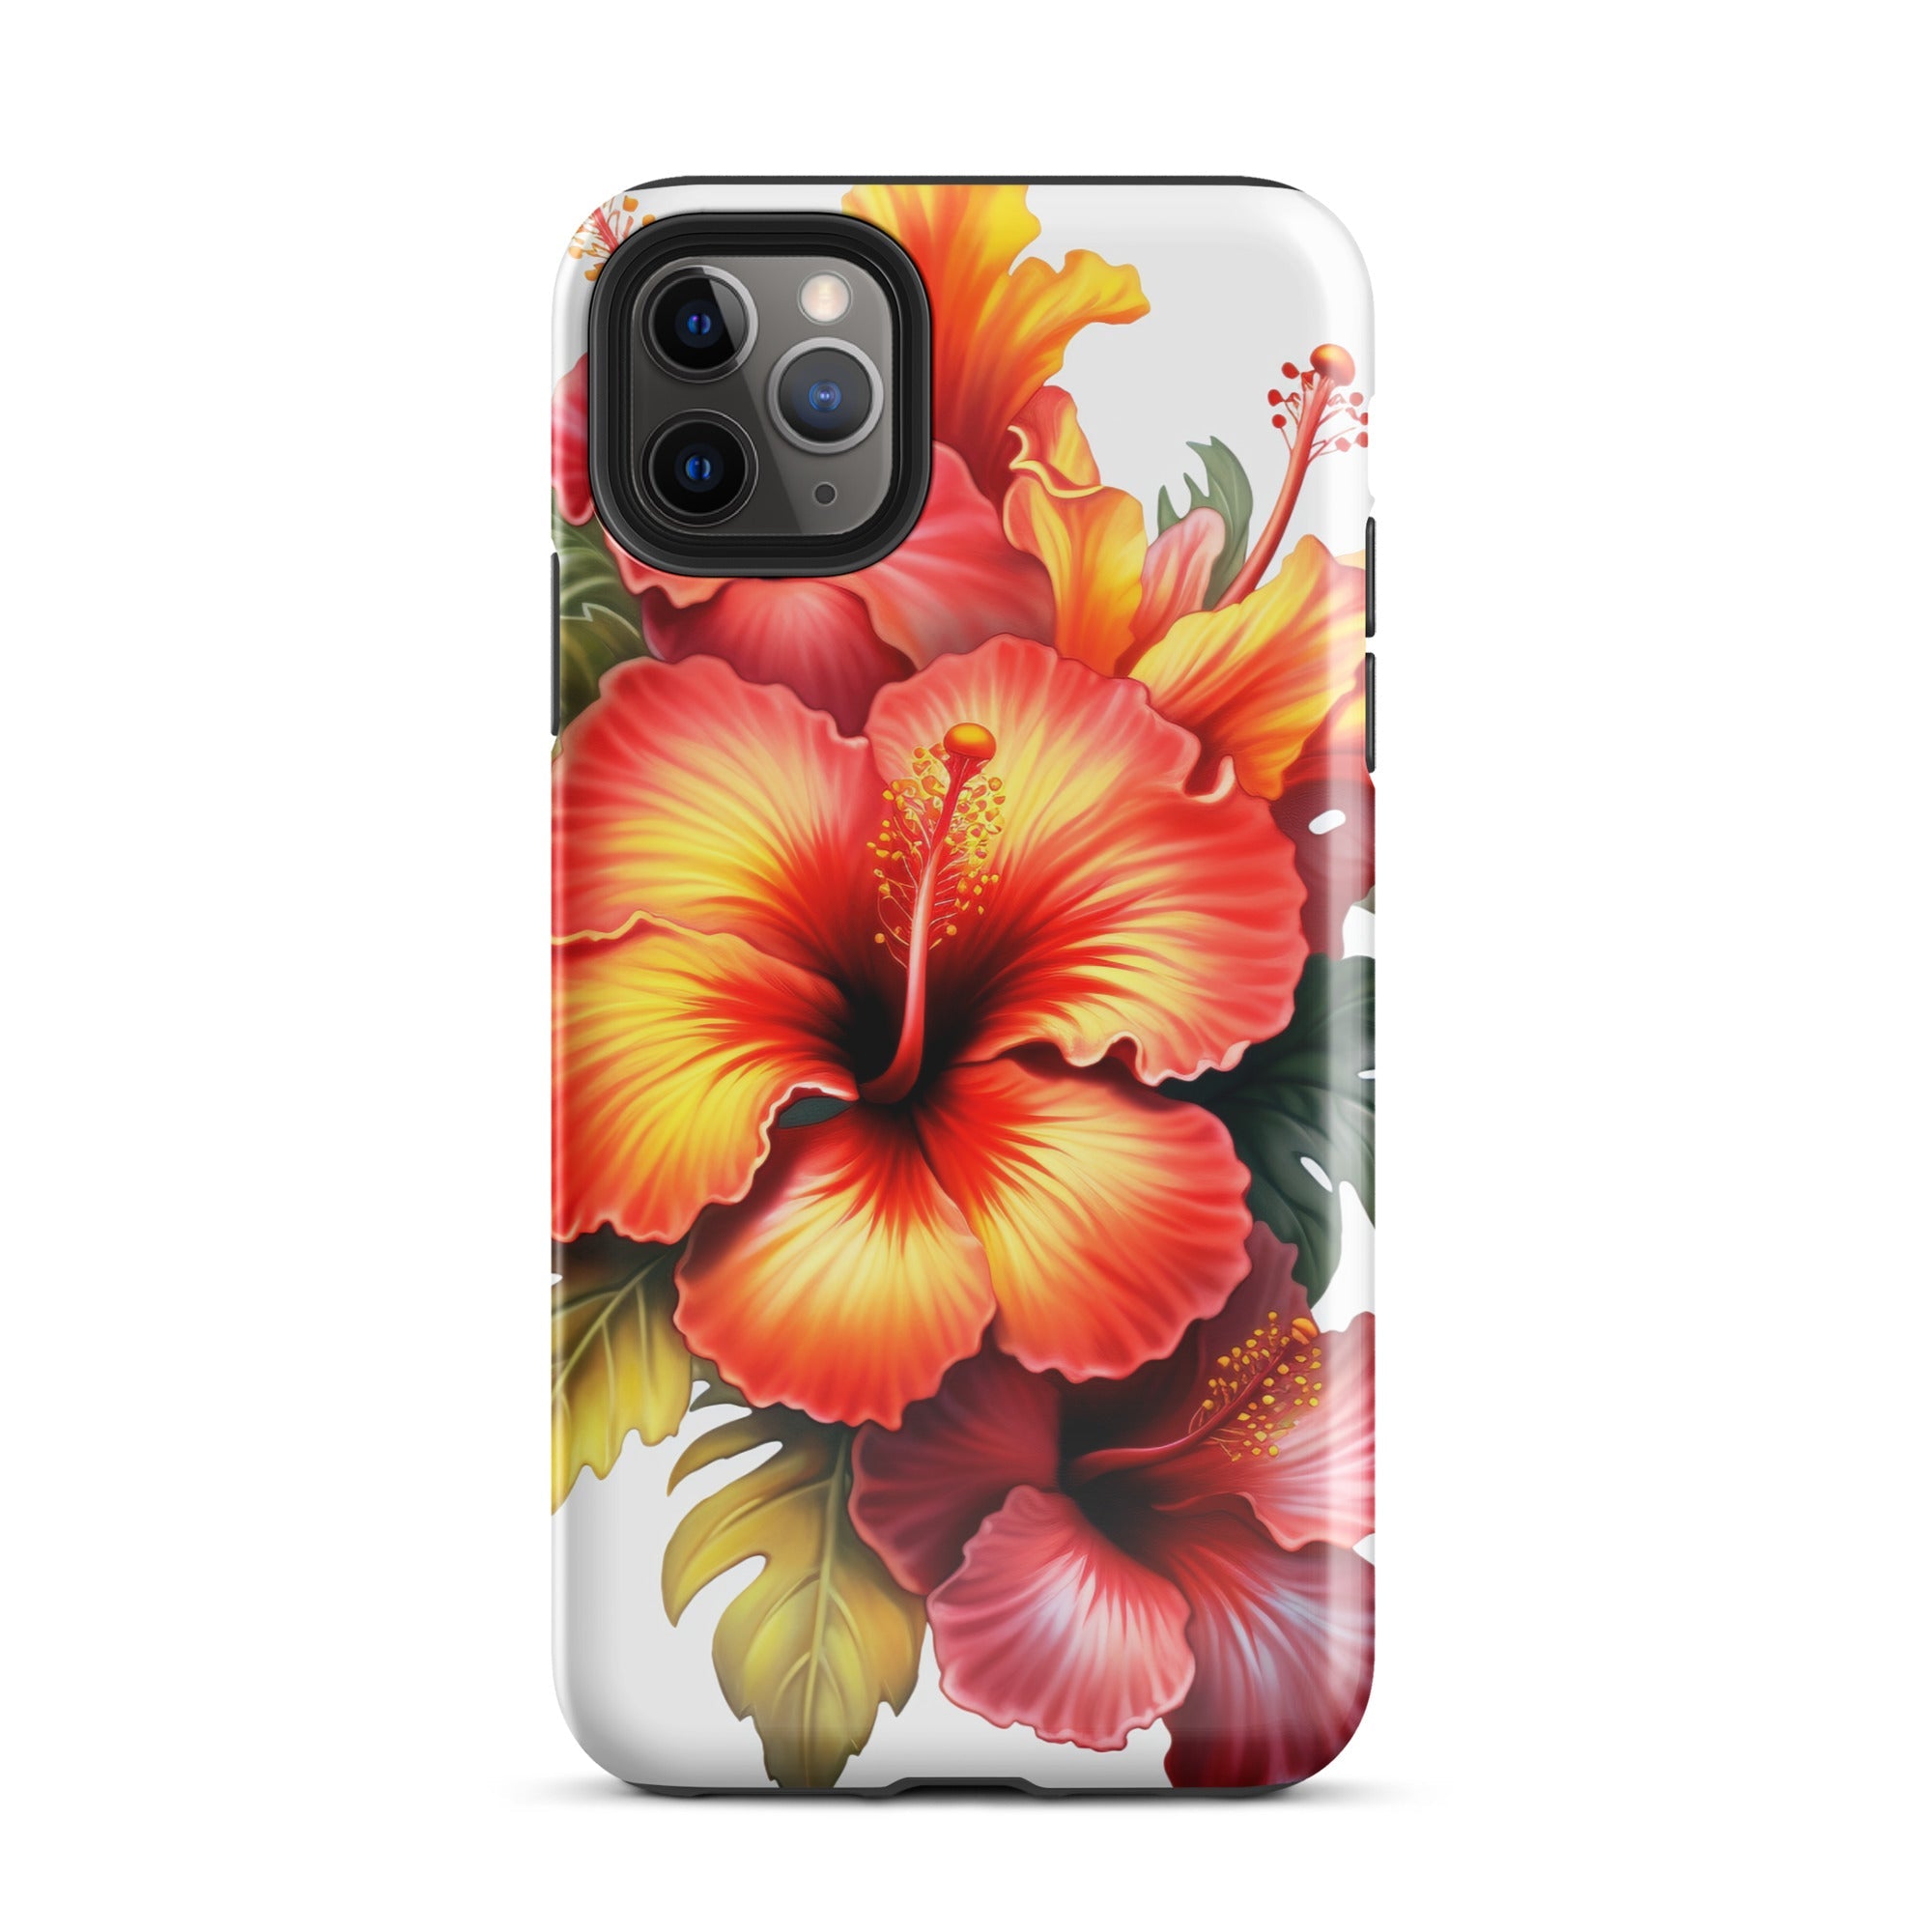 Hibiscus Flower iPhone Case by Visual Verse - Image 5